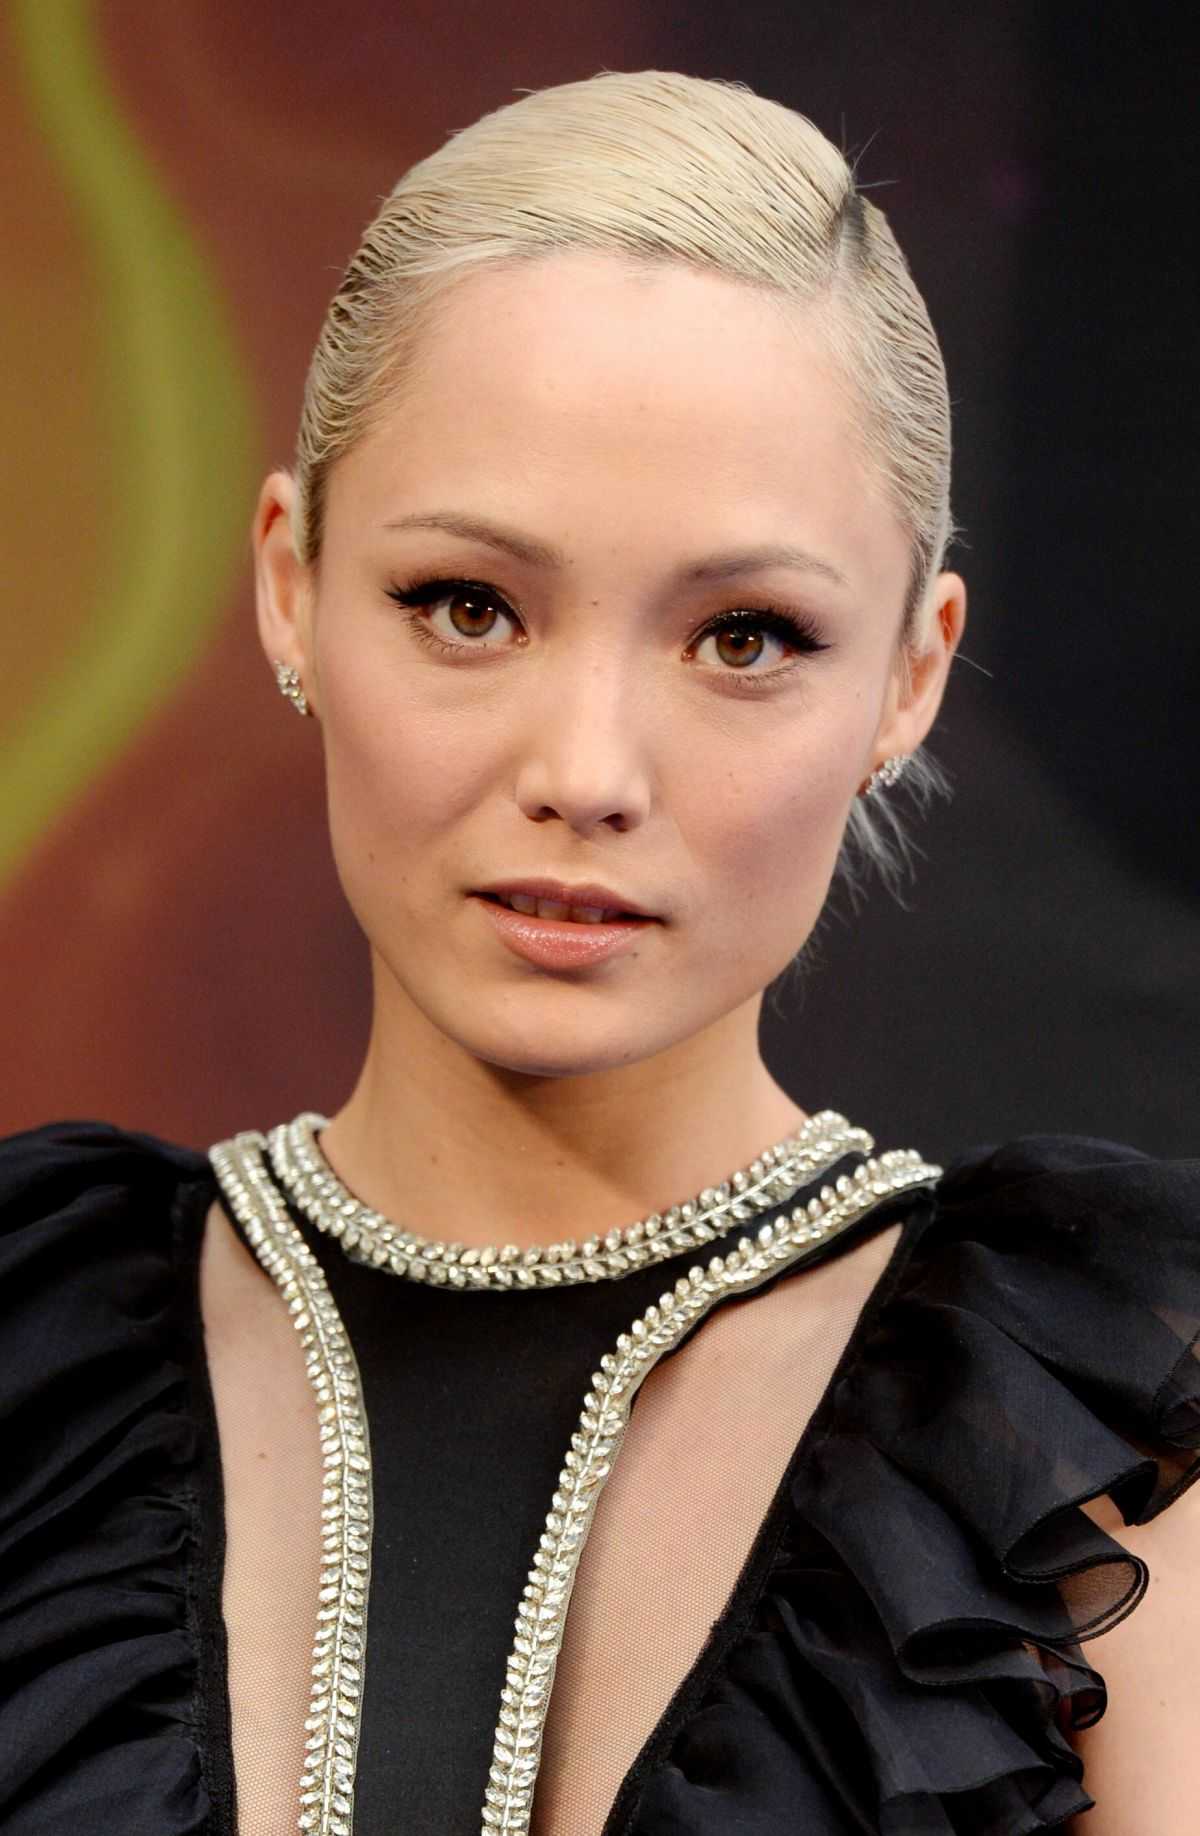 70+ Hot Pictures Of Pom Klementieff Who Plays Mantis In Marvel Cinematic Universe 239